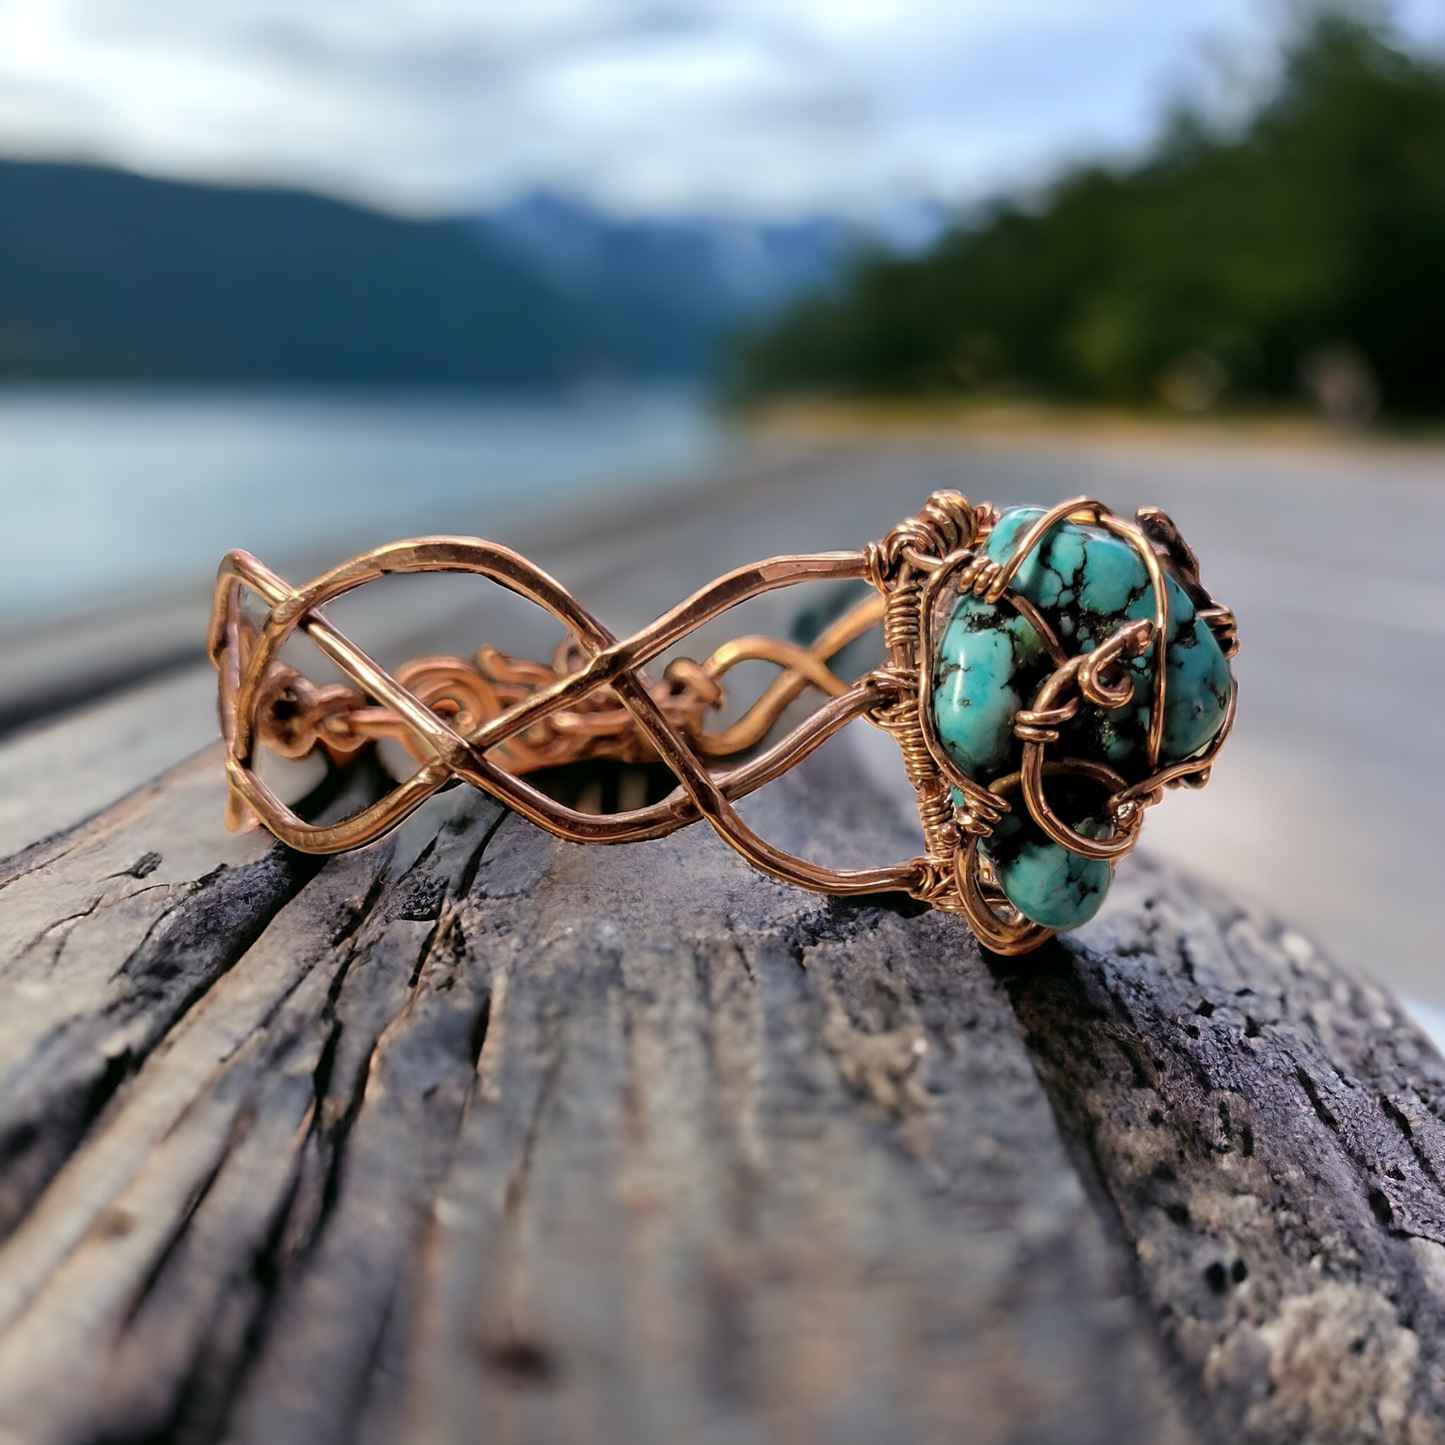 Turquoise Bracelet and necklace wire wrapped